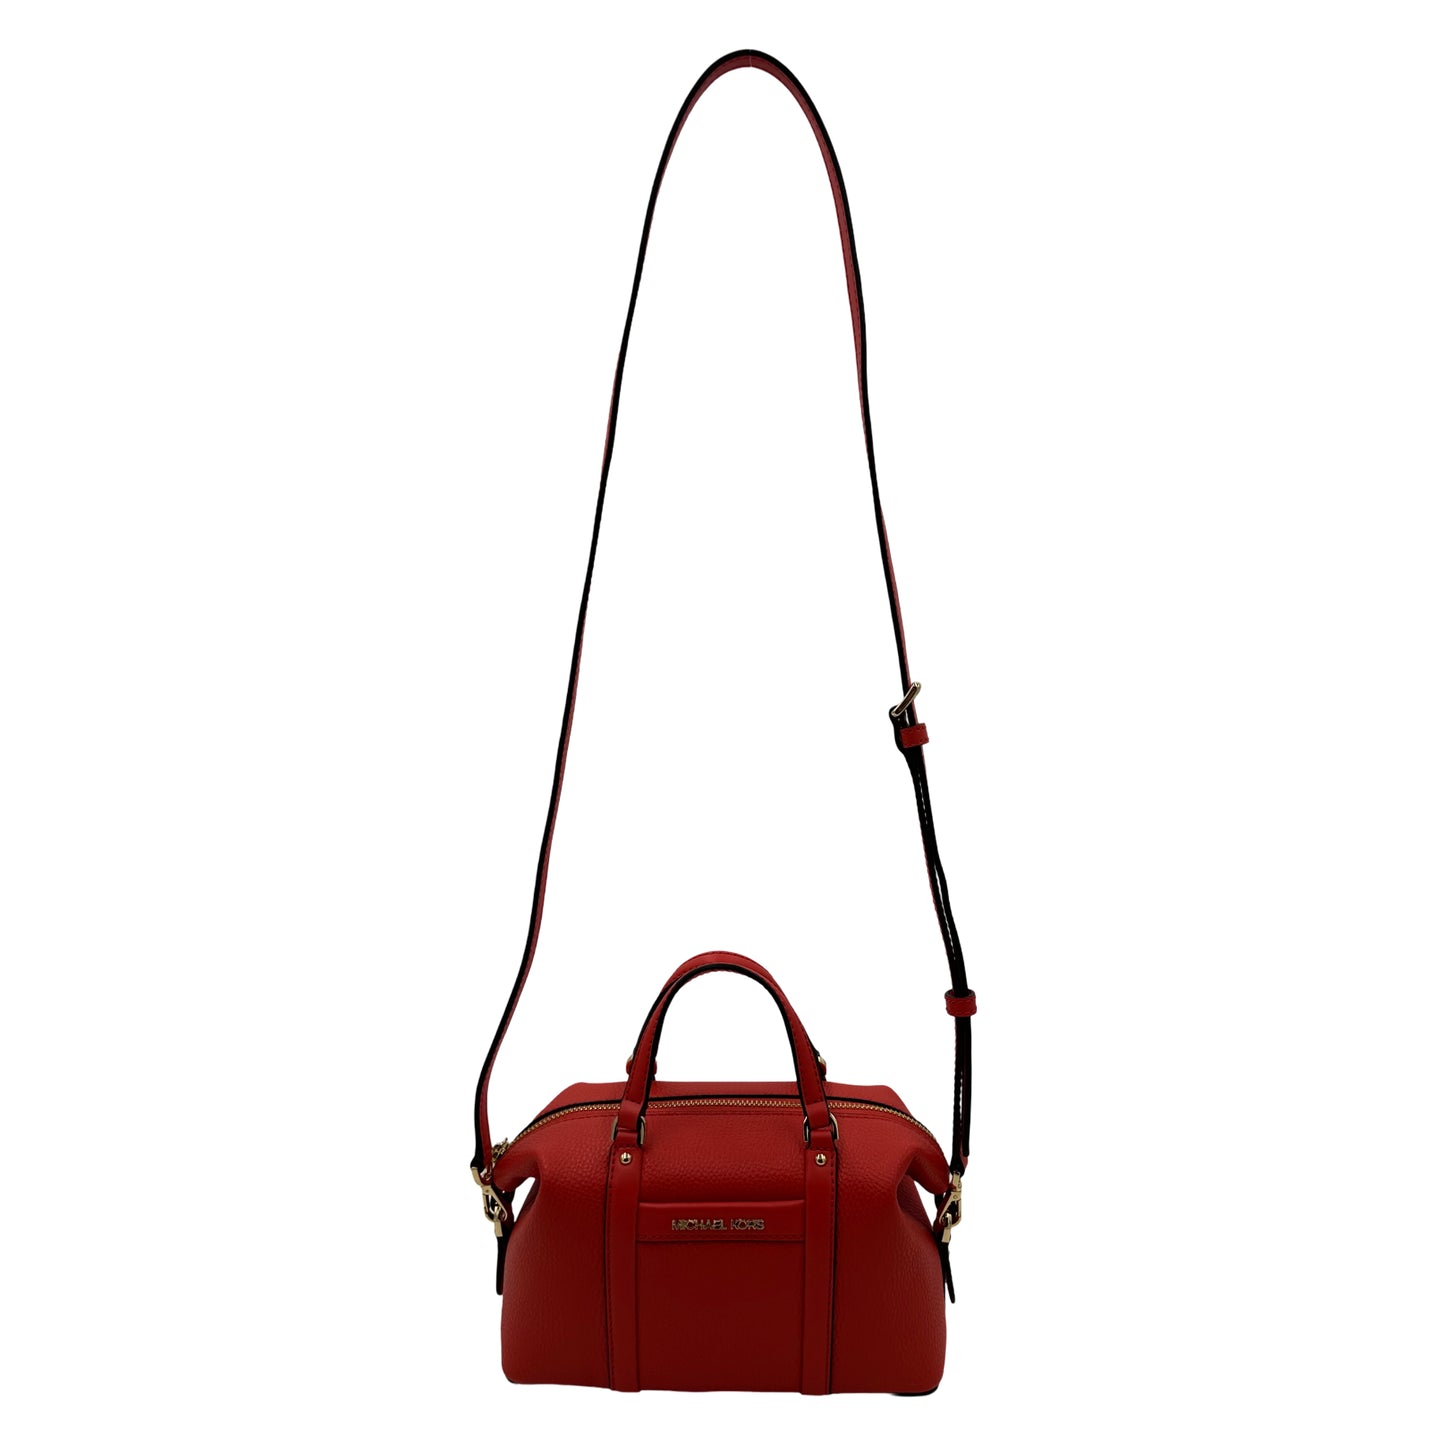 Michael Kors Beck Extra-Small Satchel - Spiced Coral